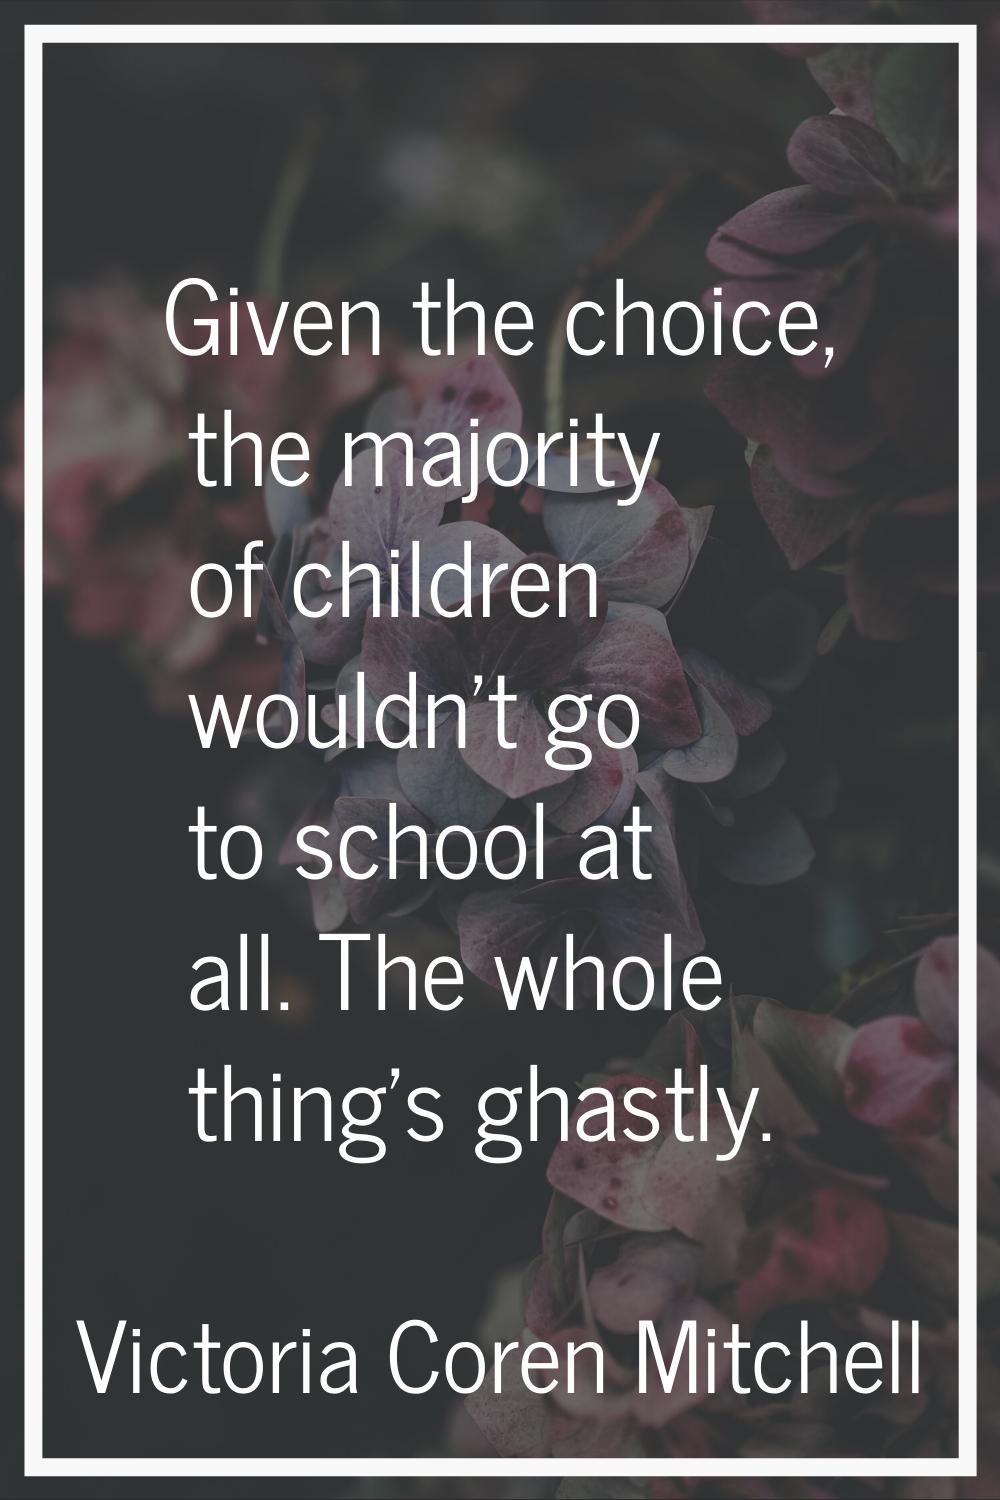 Given the choice, the majority of children wouldn't go to school at all. The whole thing's ghastly.